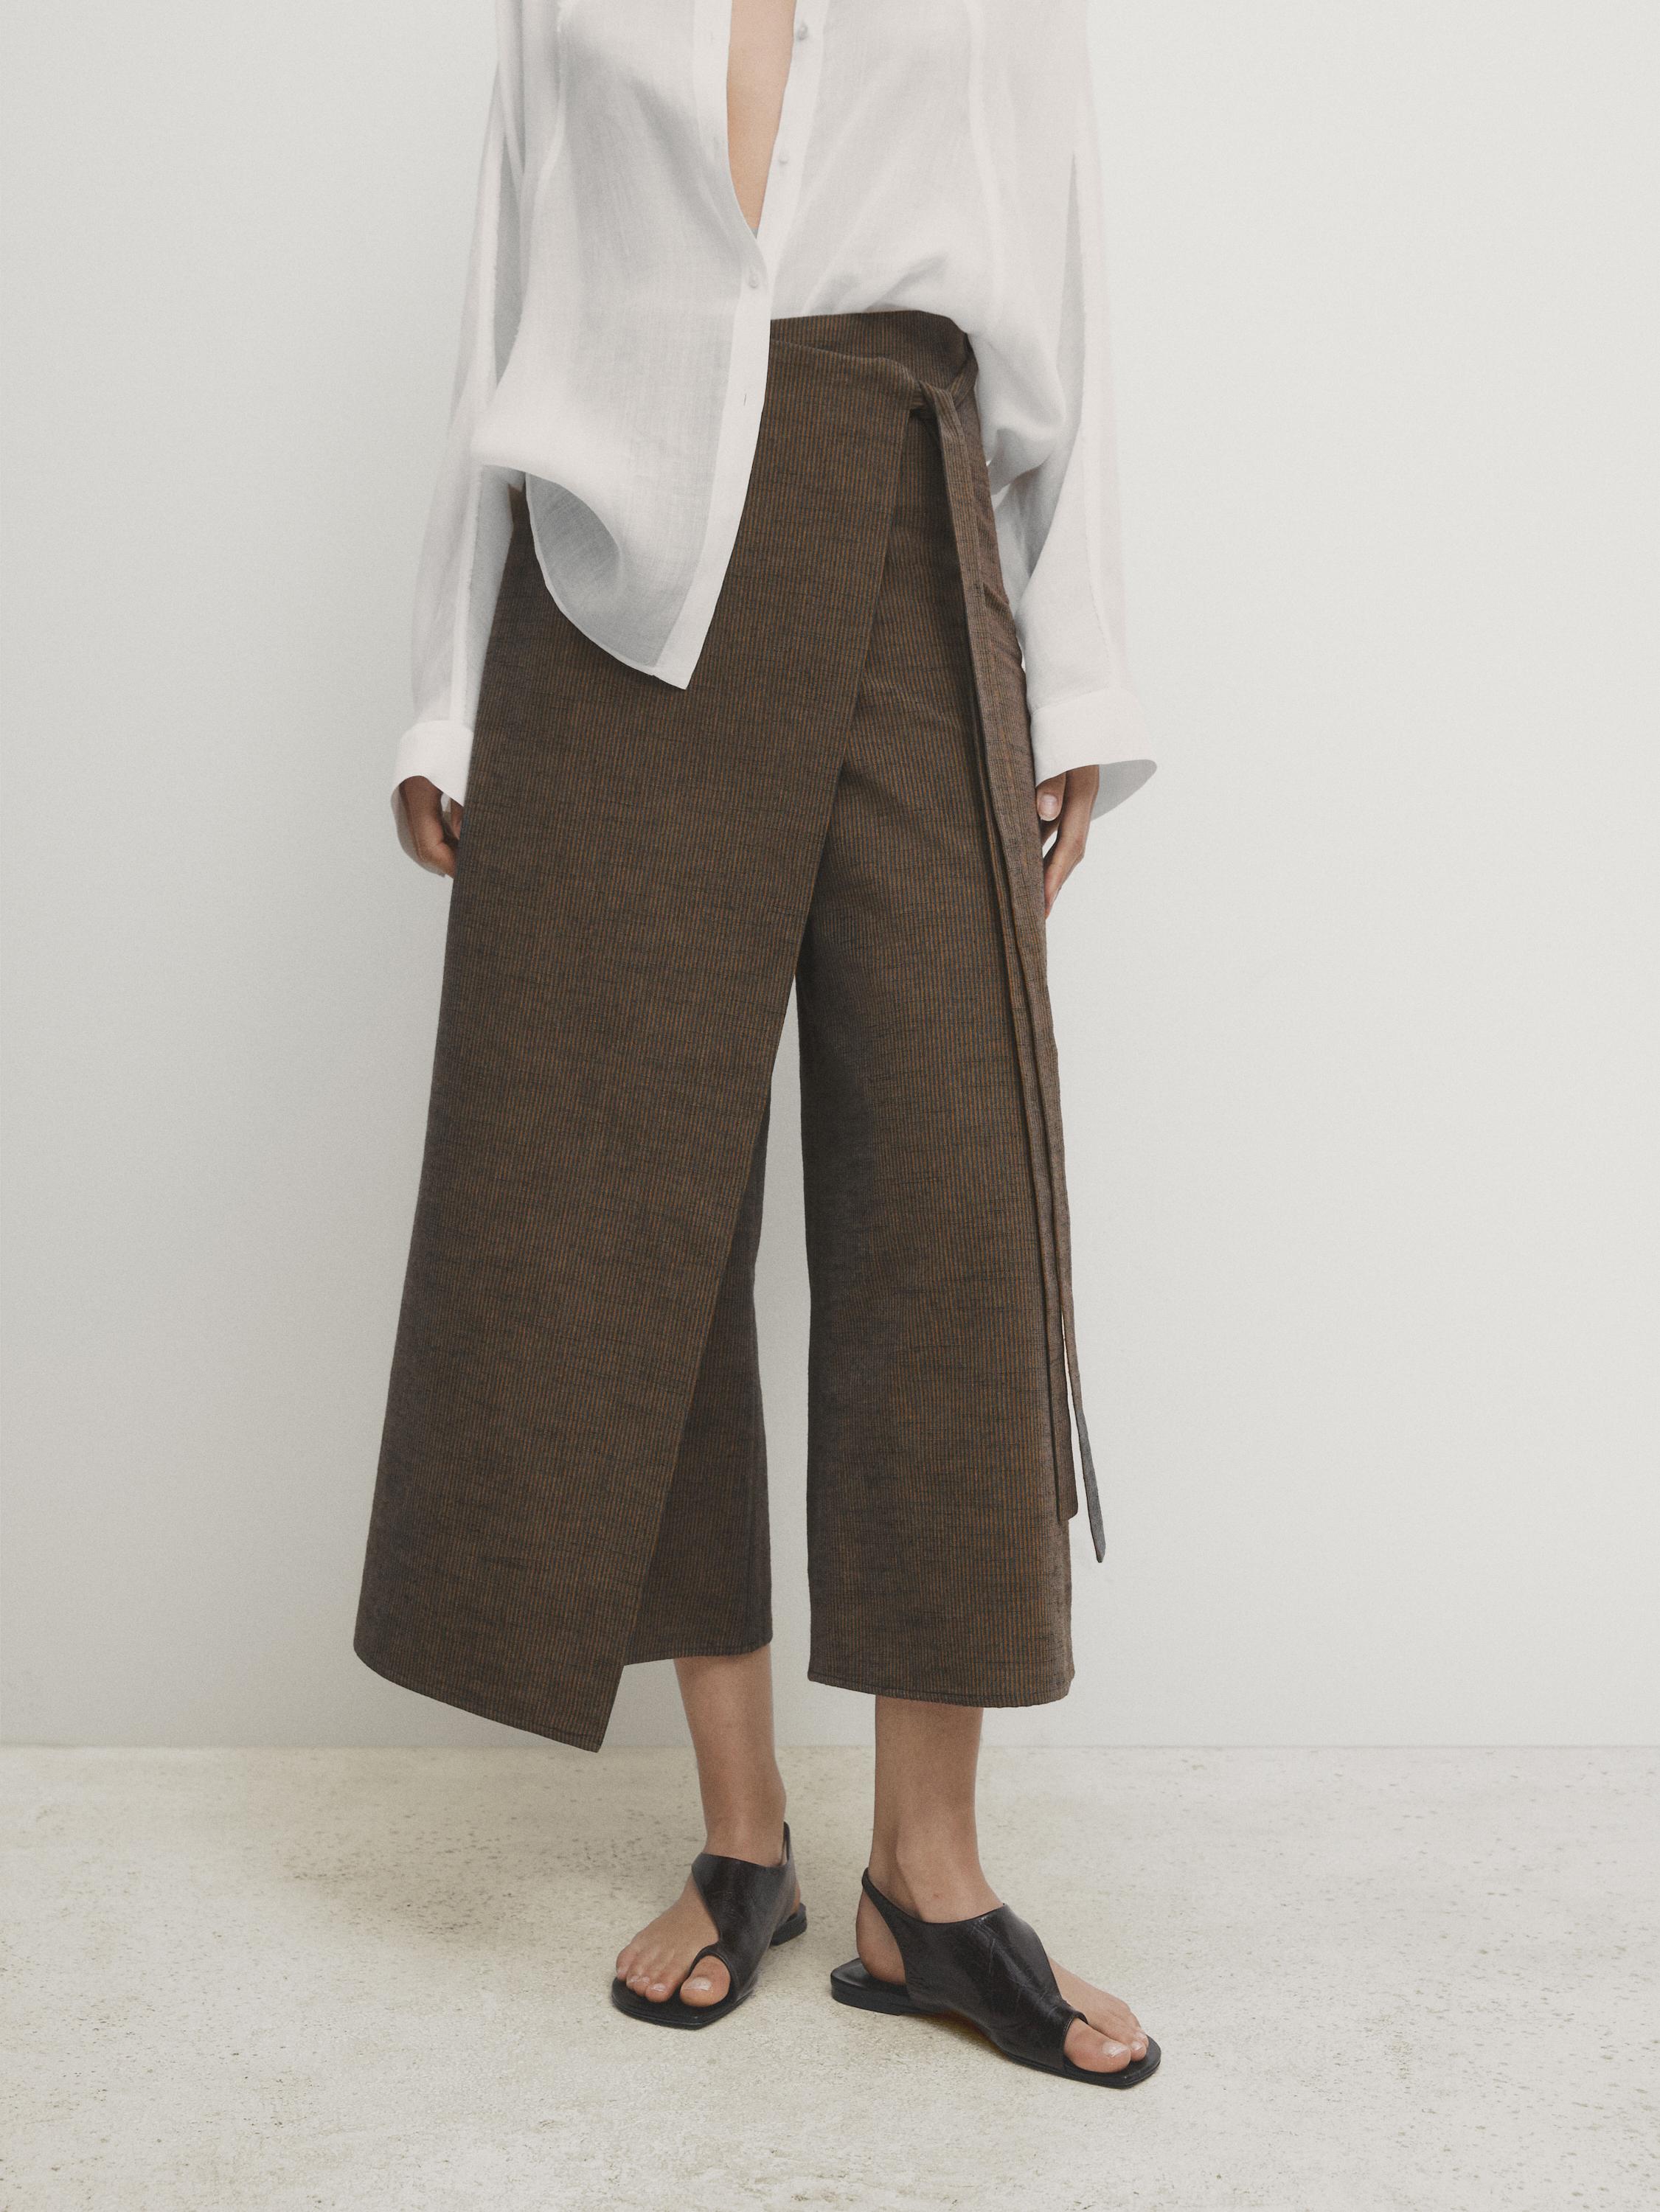 Two-tone striped skirt over trousers